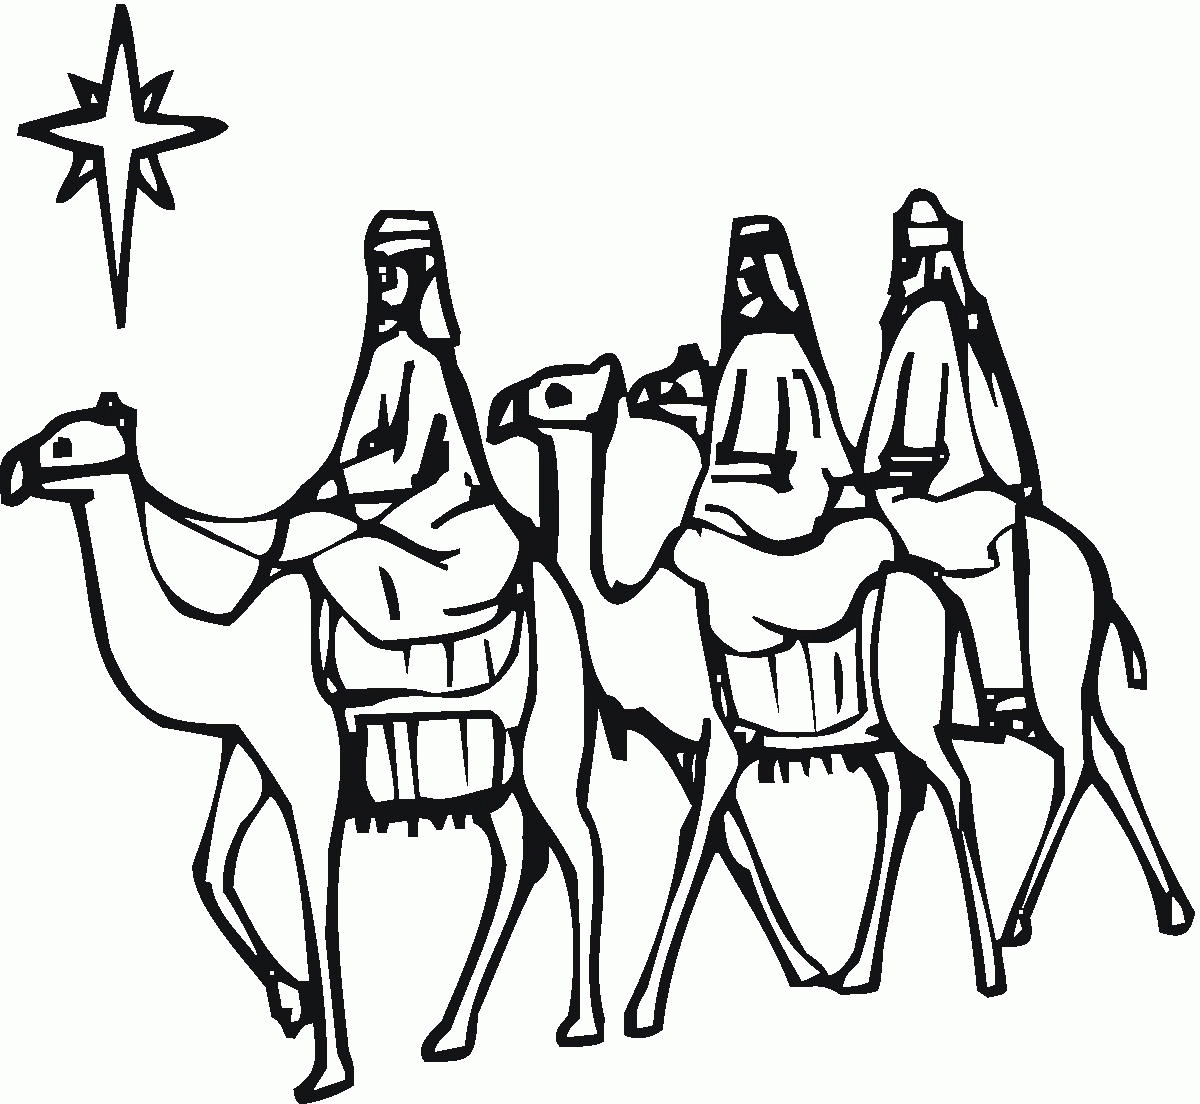 3 Kings On Camels Coloring Page - Coloring Pages For All Ages